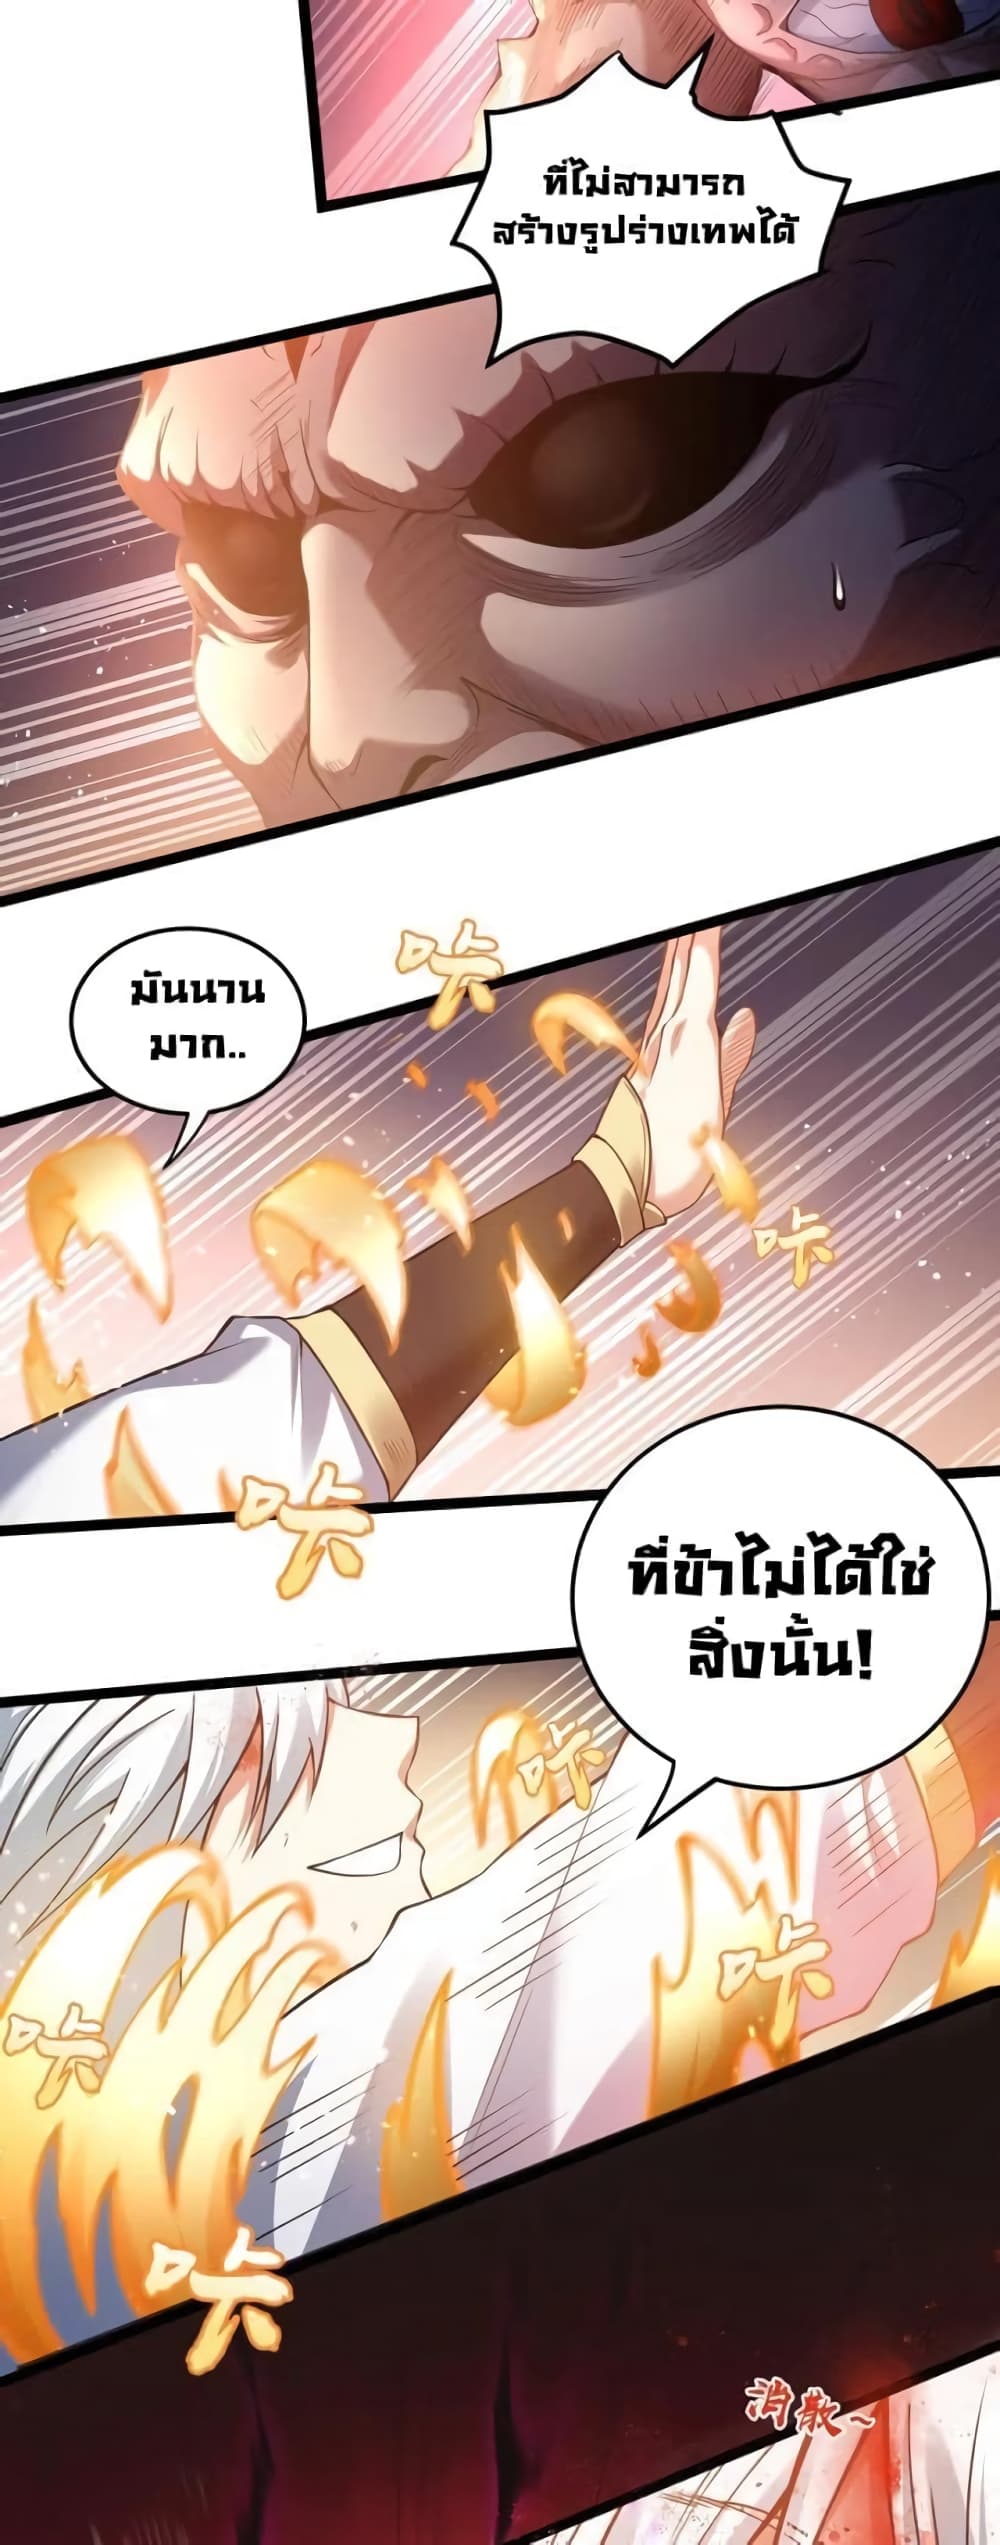 Godsian Masian from Another World ตอนที่ 91 (15)